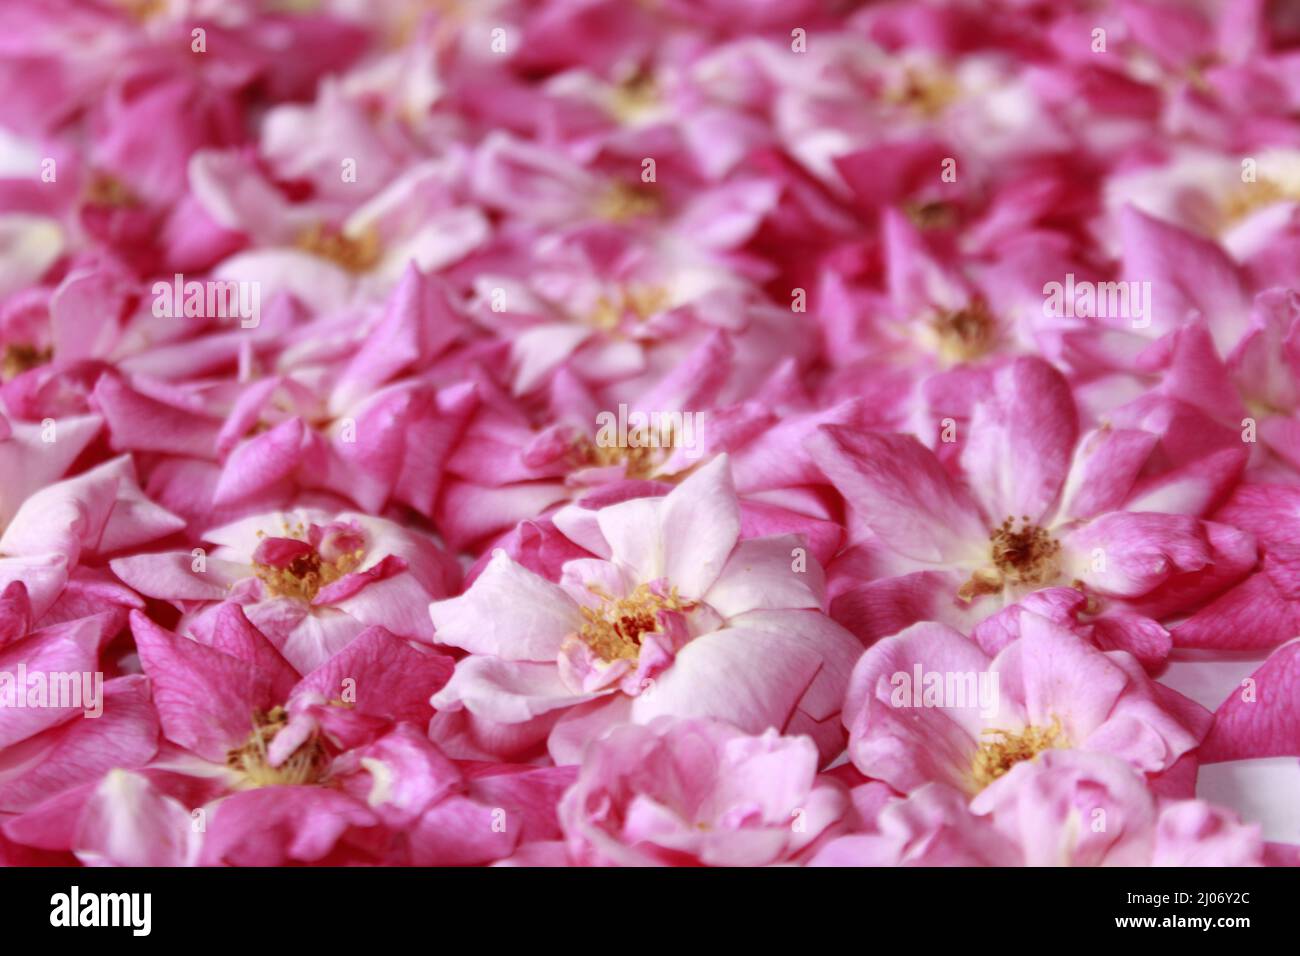 Pattern of pink rose petals. Floral print background Stock Photo